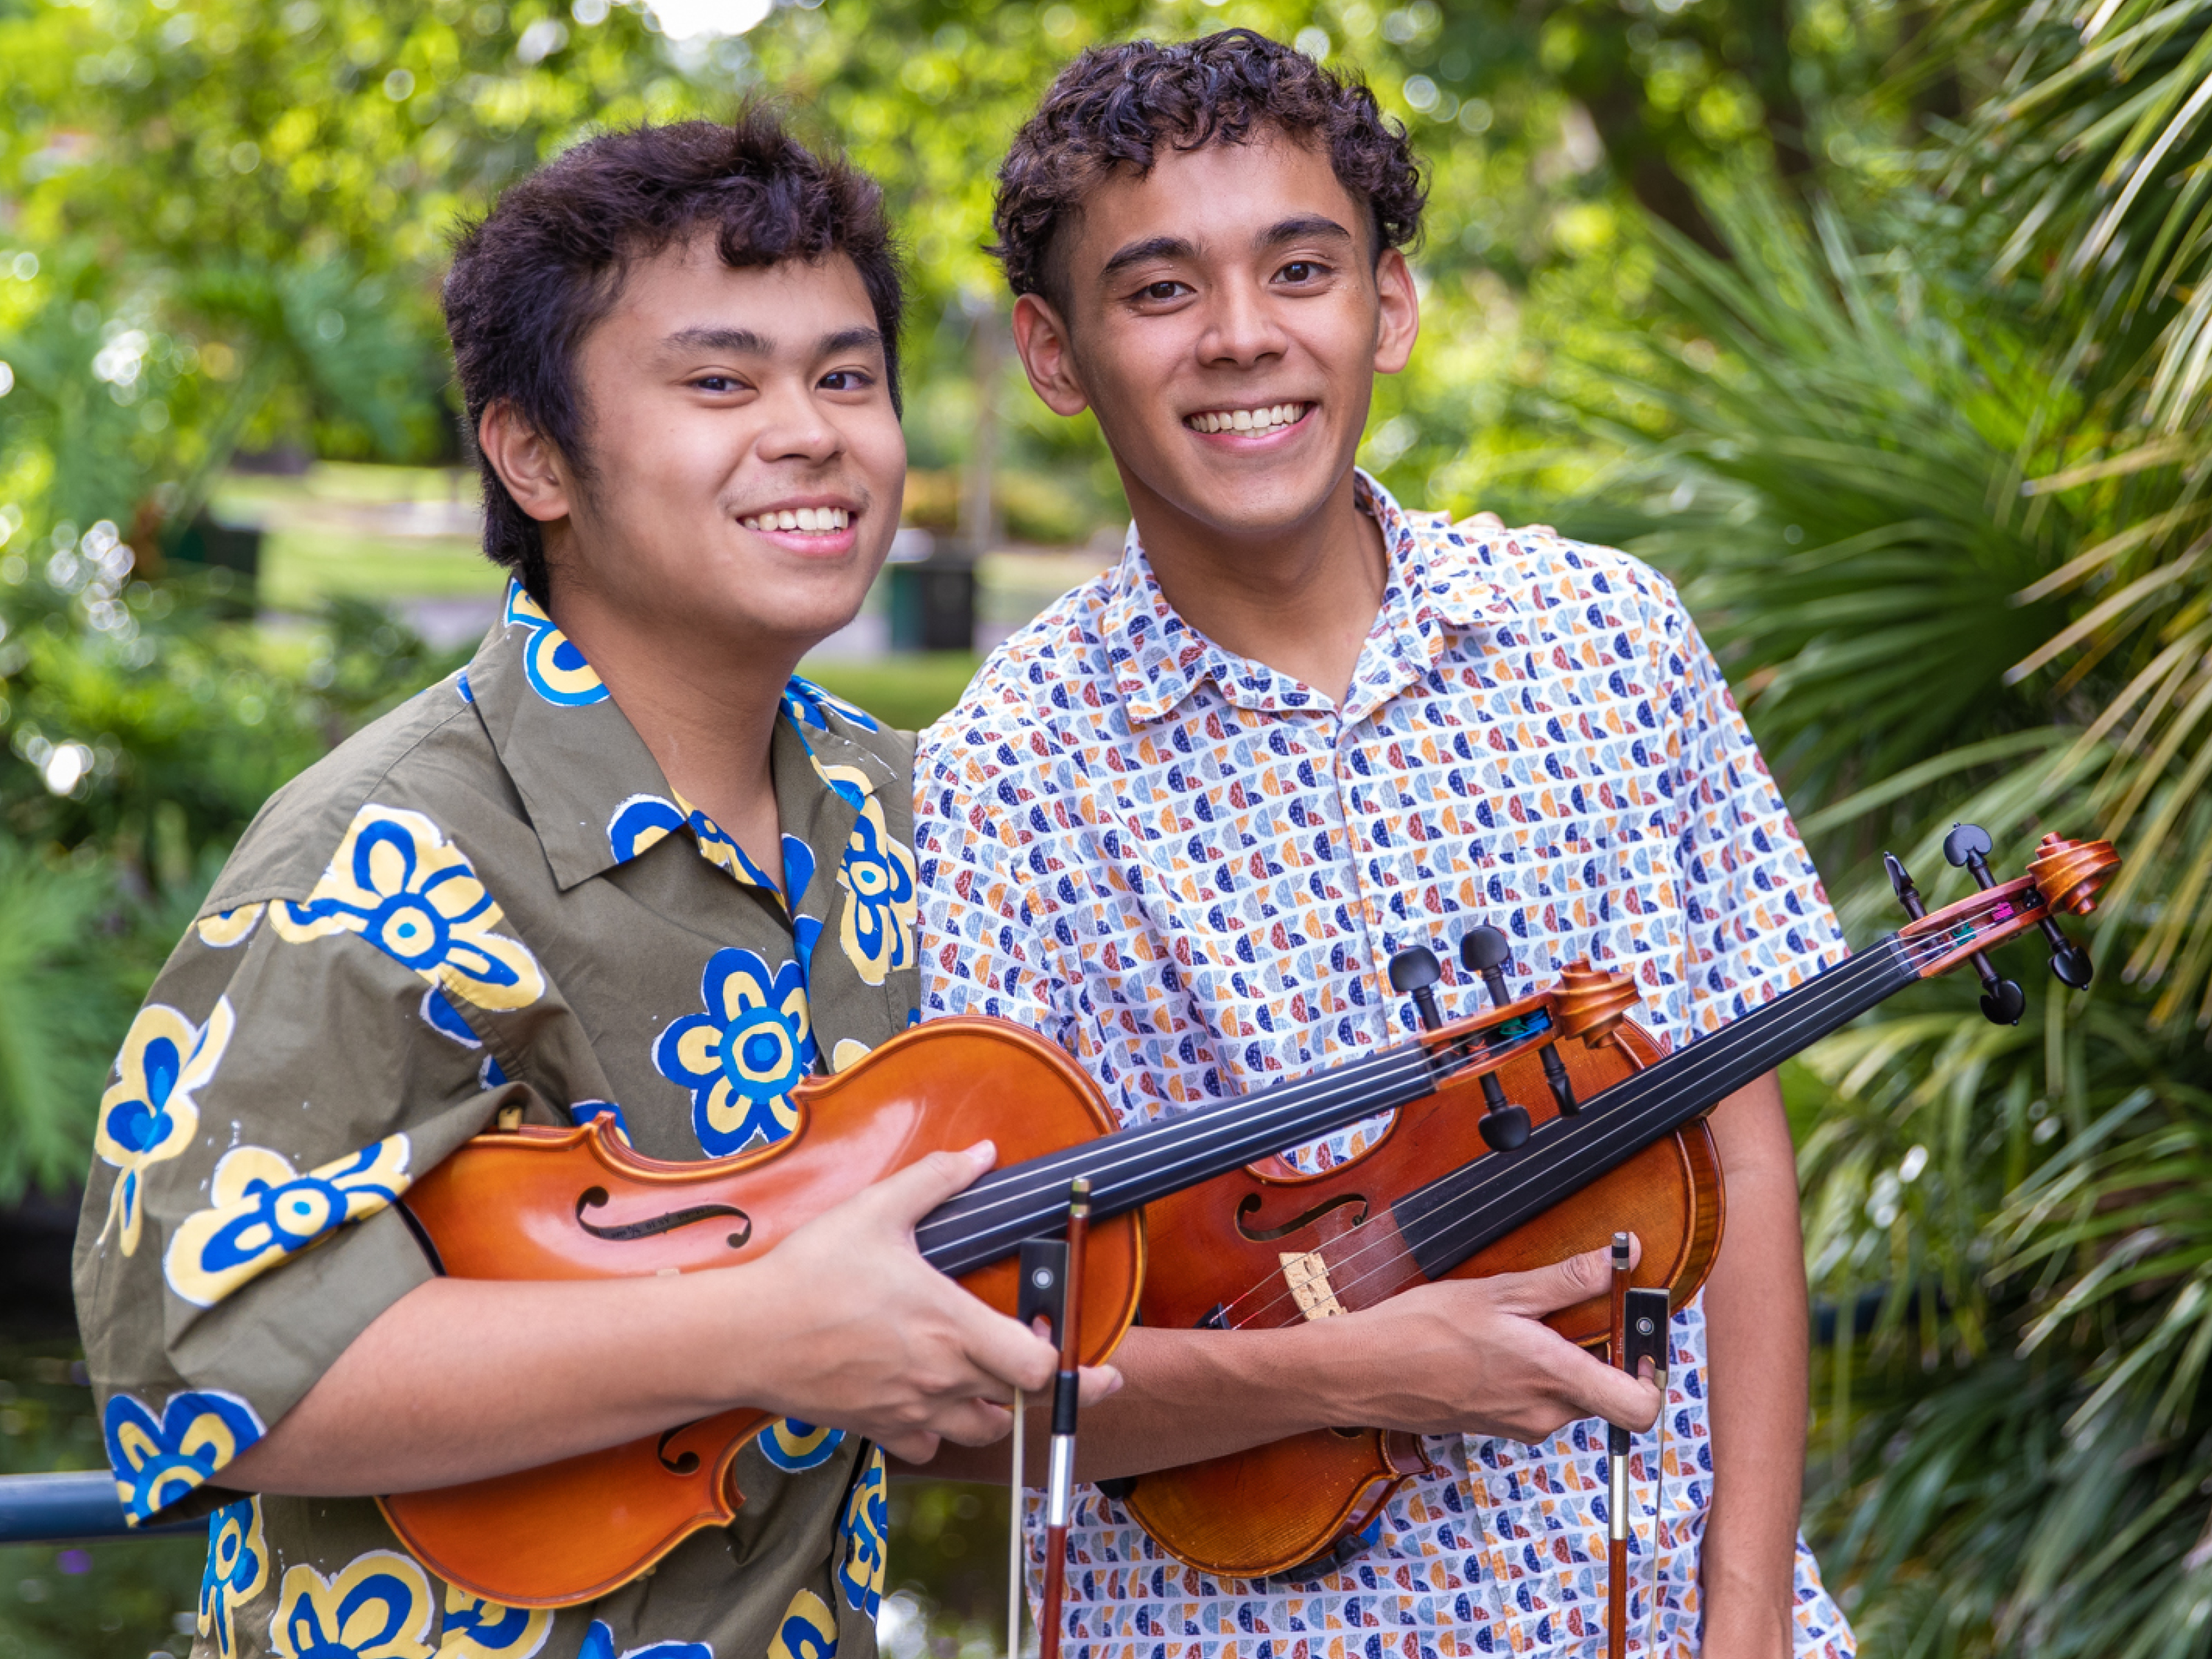 Two young people standing together smiling, each holding a violin